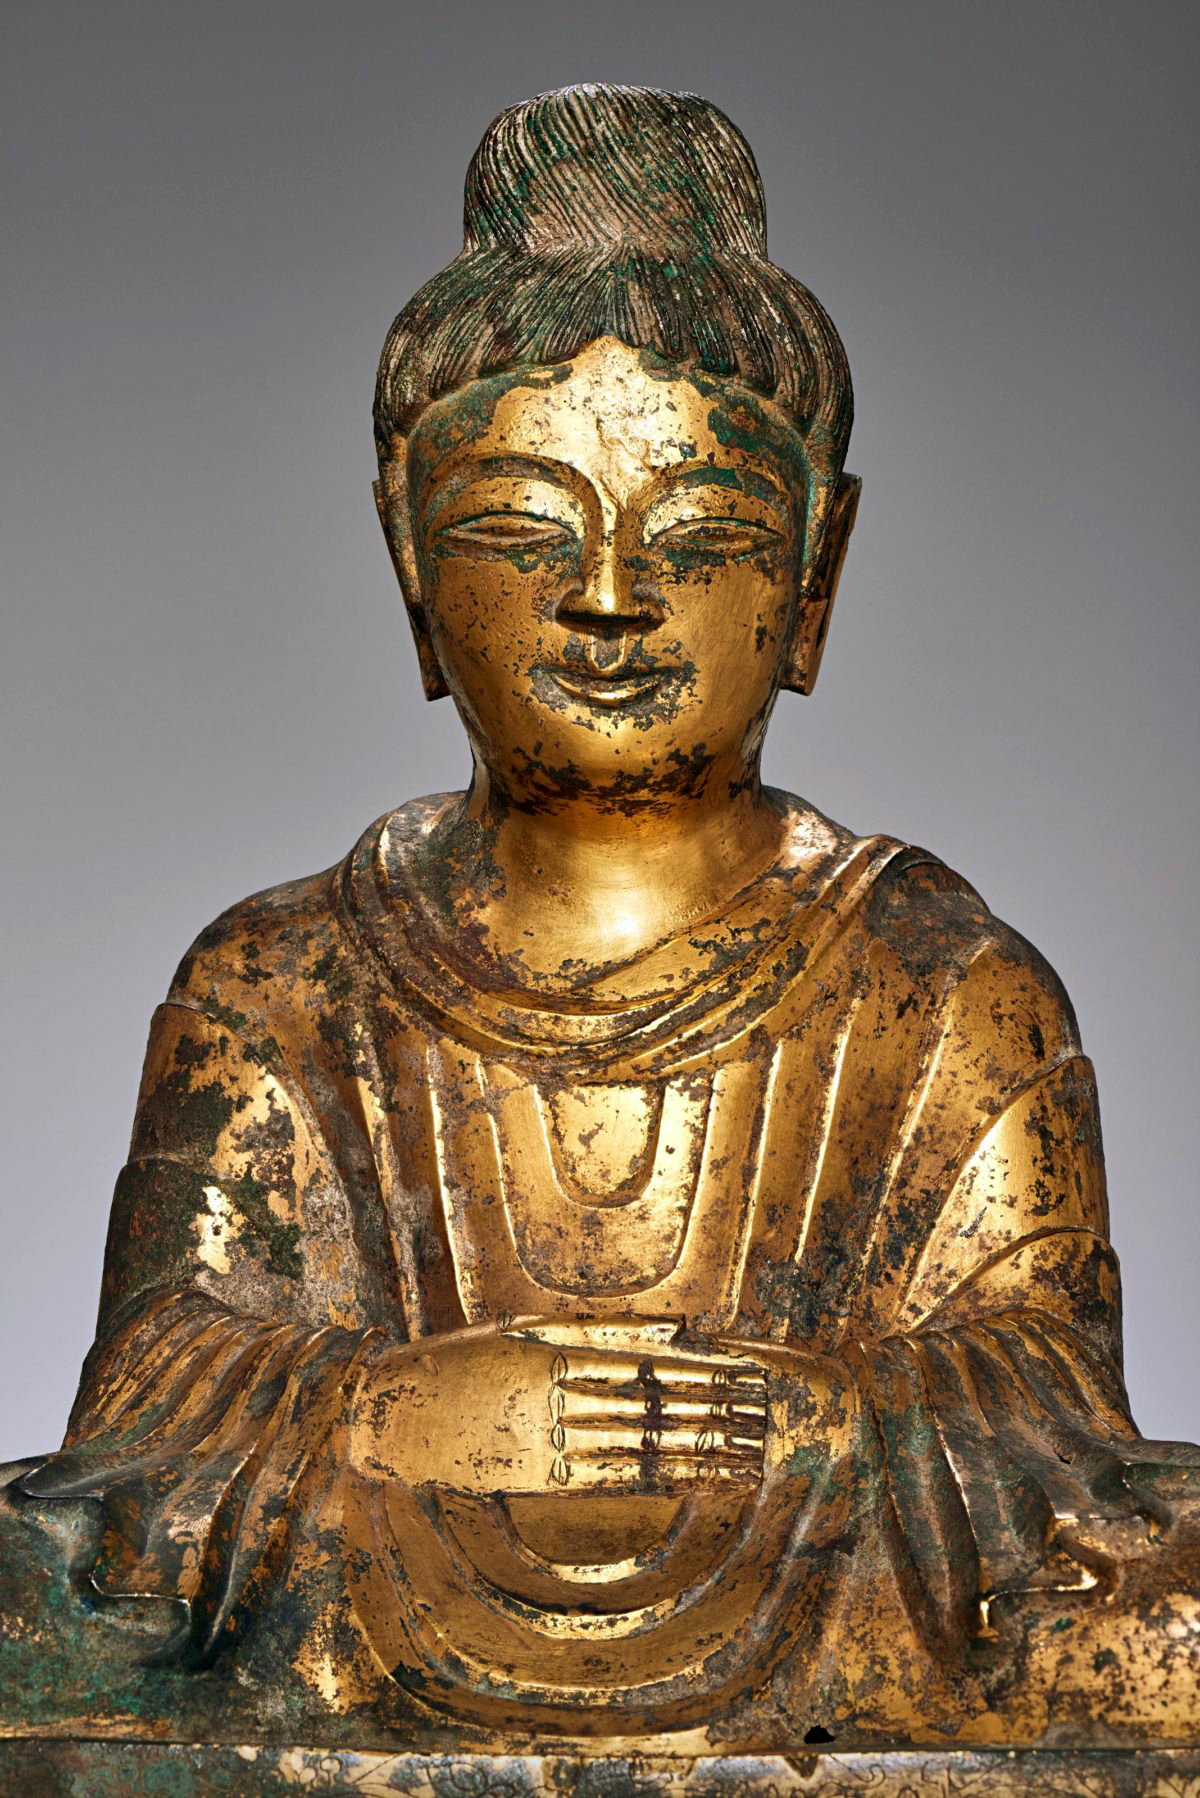 This is the earliest known dated Buddha sculpture produced in China, made 400 years after Buddhism was introduced there. Buddha, 338, Later Zhao Kingdom, bronze with gilding, China, Hebei province, 16 inches tall (Asian Art Museum)